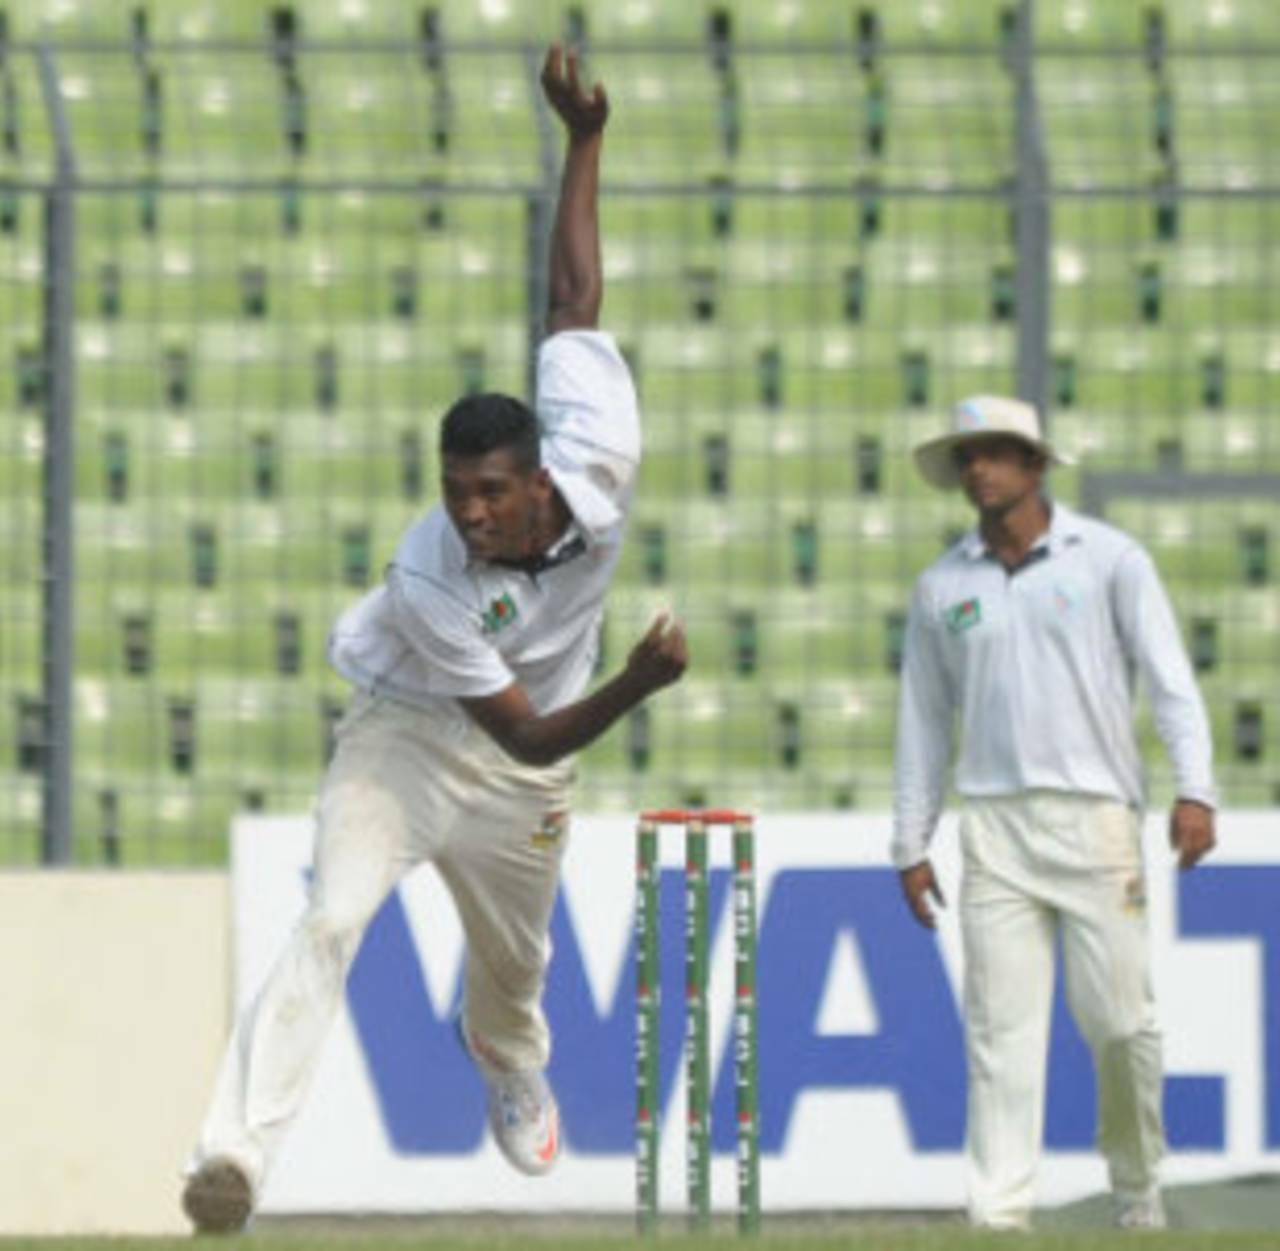 Al-Amin Hossain's four wickets gave South Zone the lead, South Zone v North Zone, Final, Bangladesh Cricket League, 2nd day, Mirpur, May 10, 2014